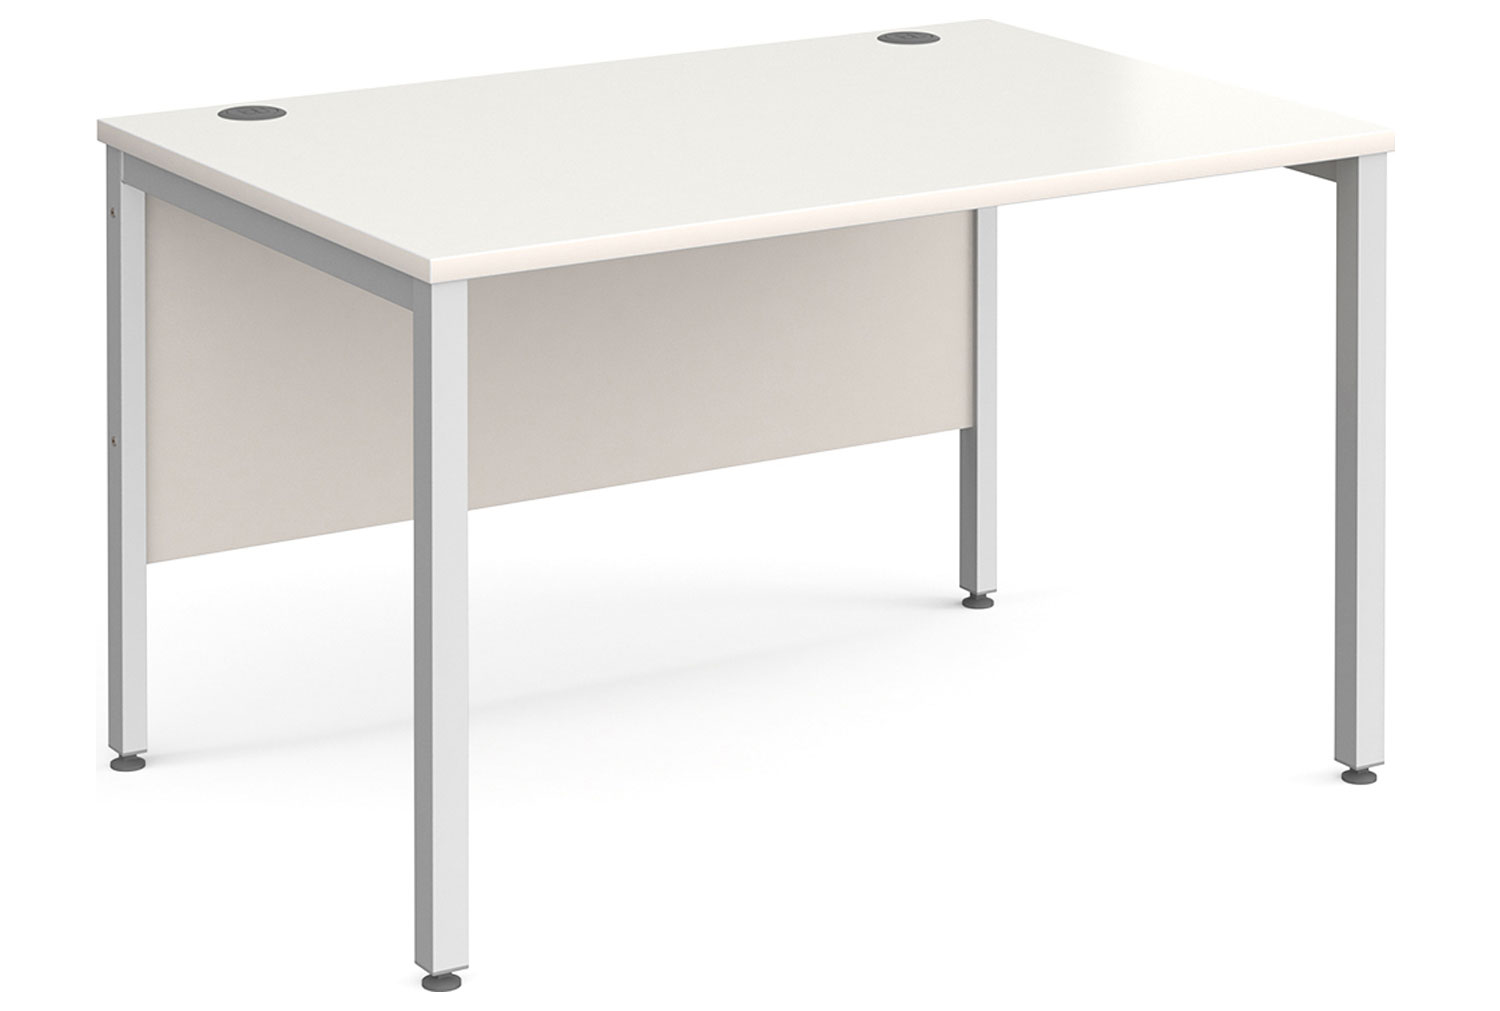 Tully Bench Rectangular Office Desk 120wx80dx73h (cm), White, Express Delivery